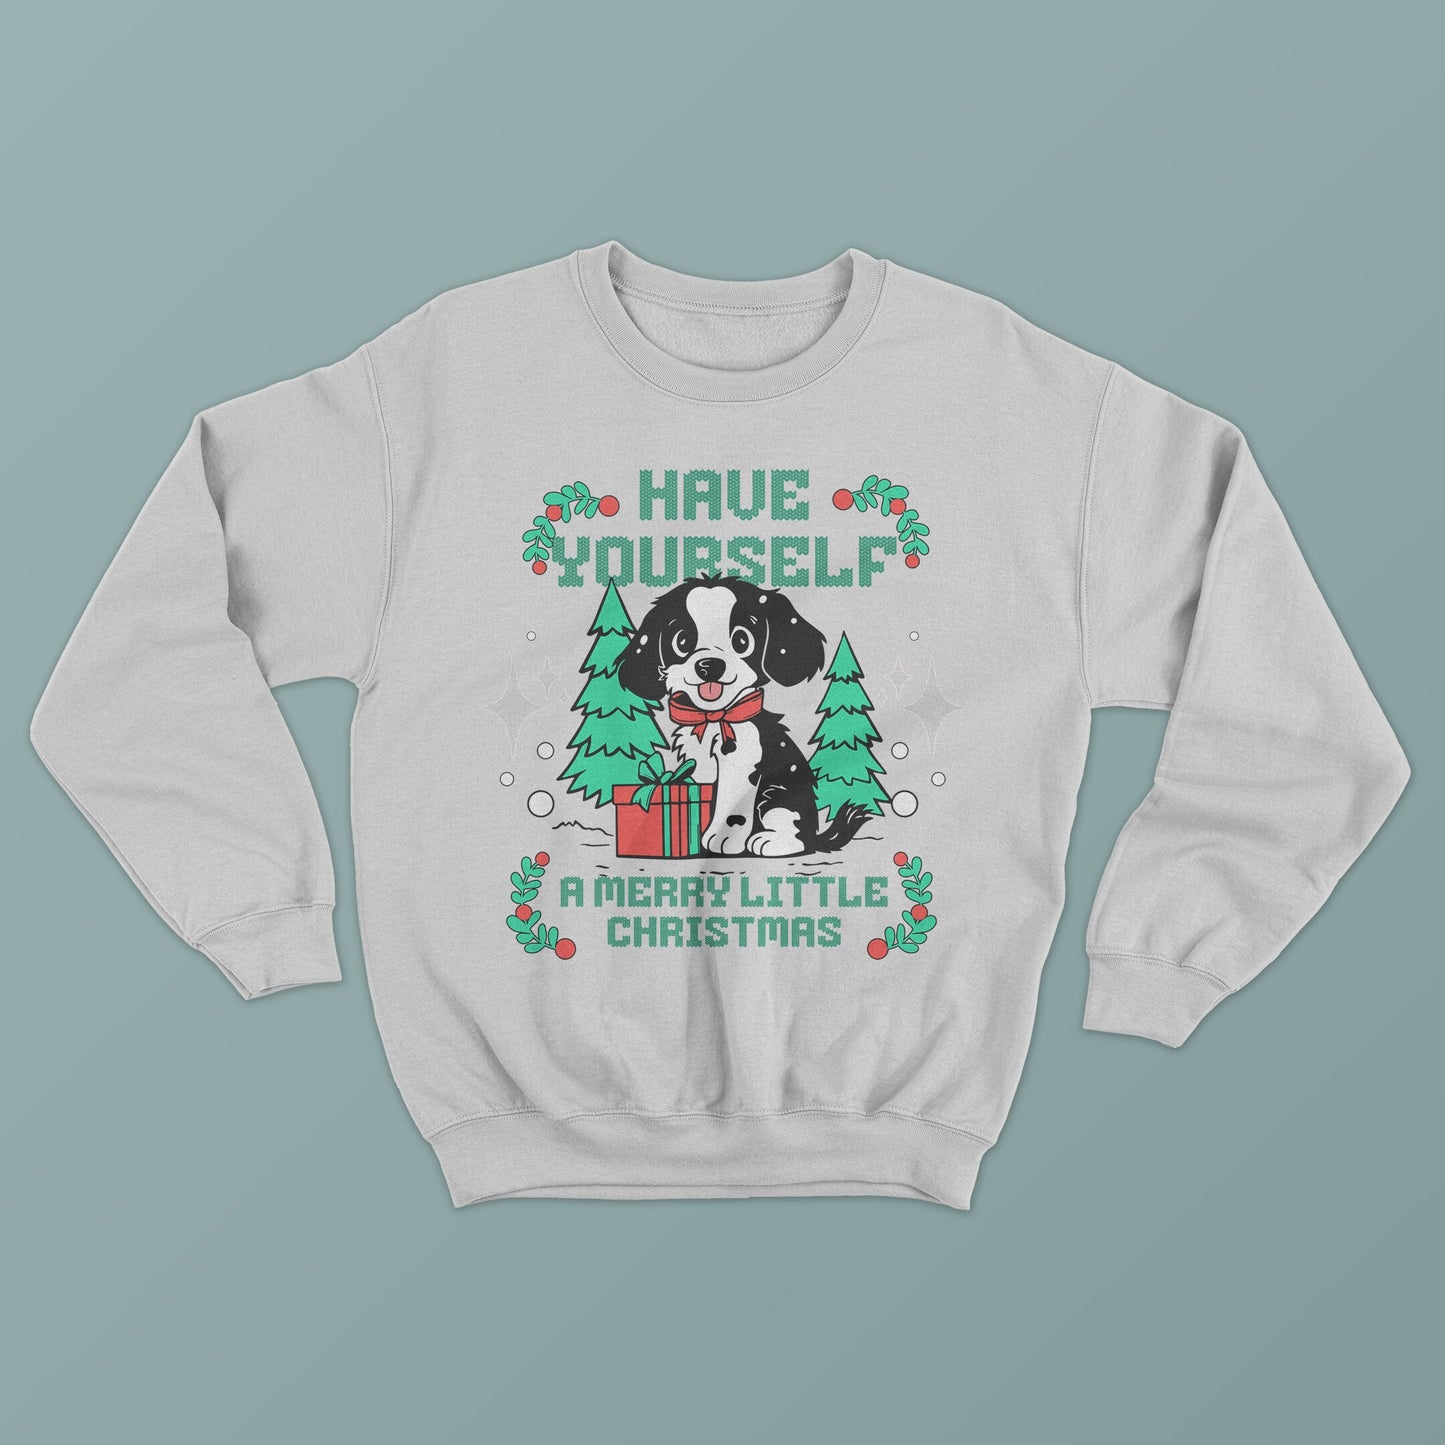 Have Yourself a Little Merry Christmas Dog Picture Unisex Graphic Sweatshirt Christmas shirt, Puppy Picture, funny sweater, Christmas gift